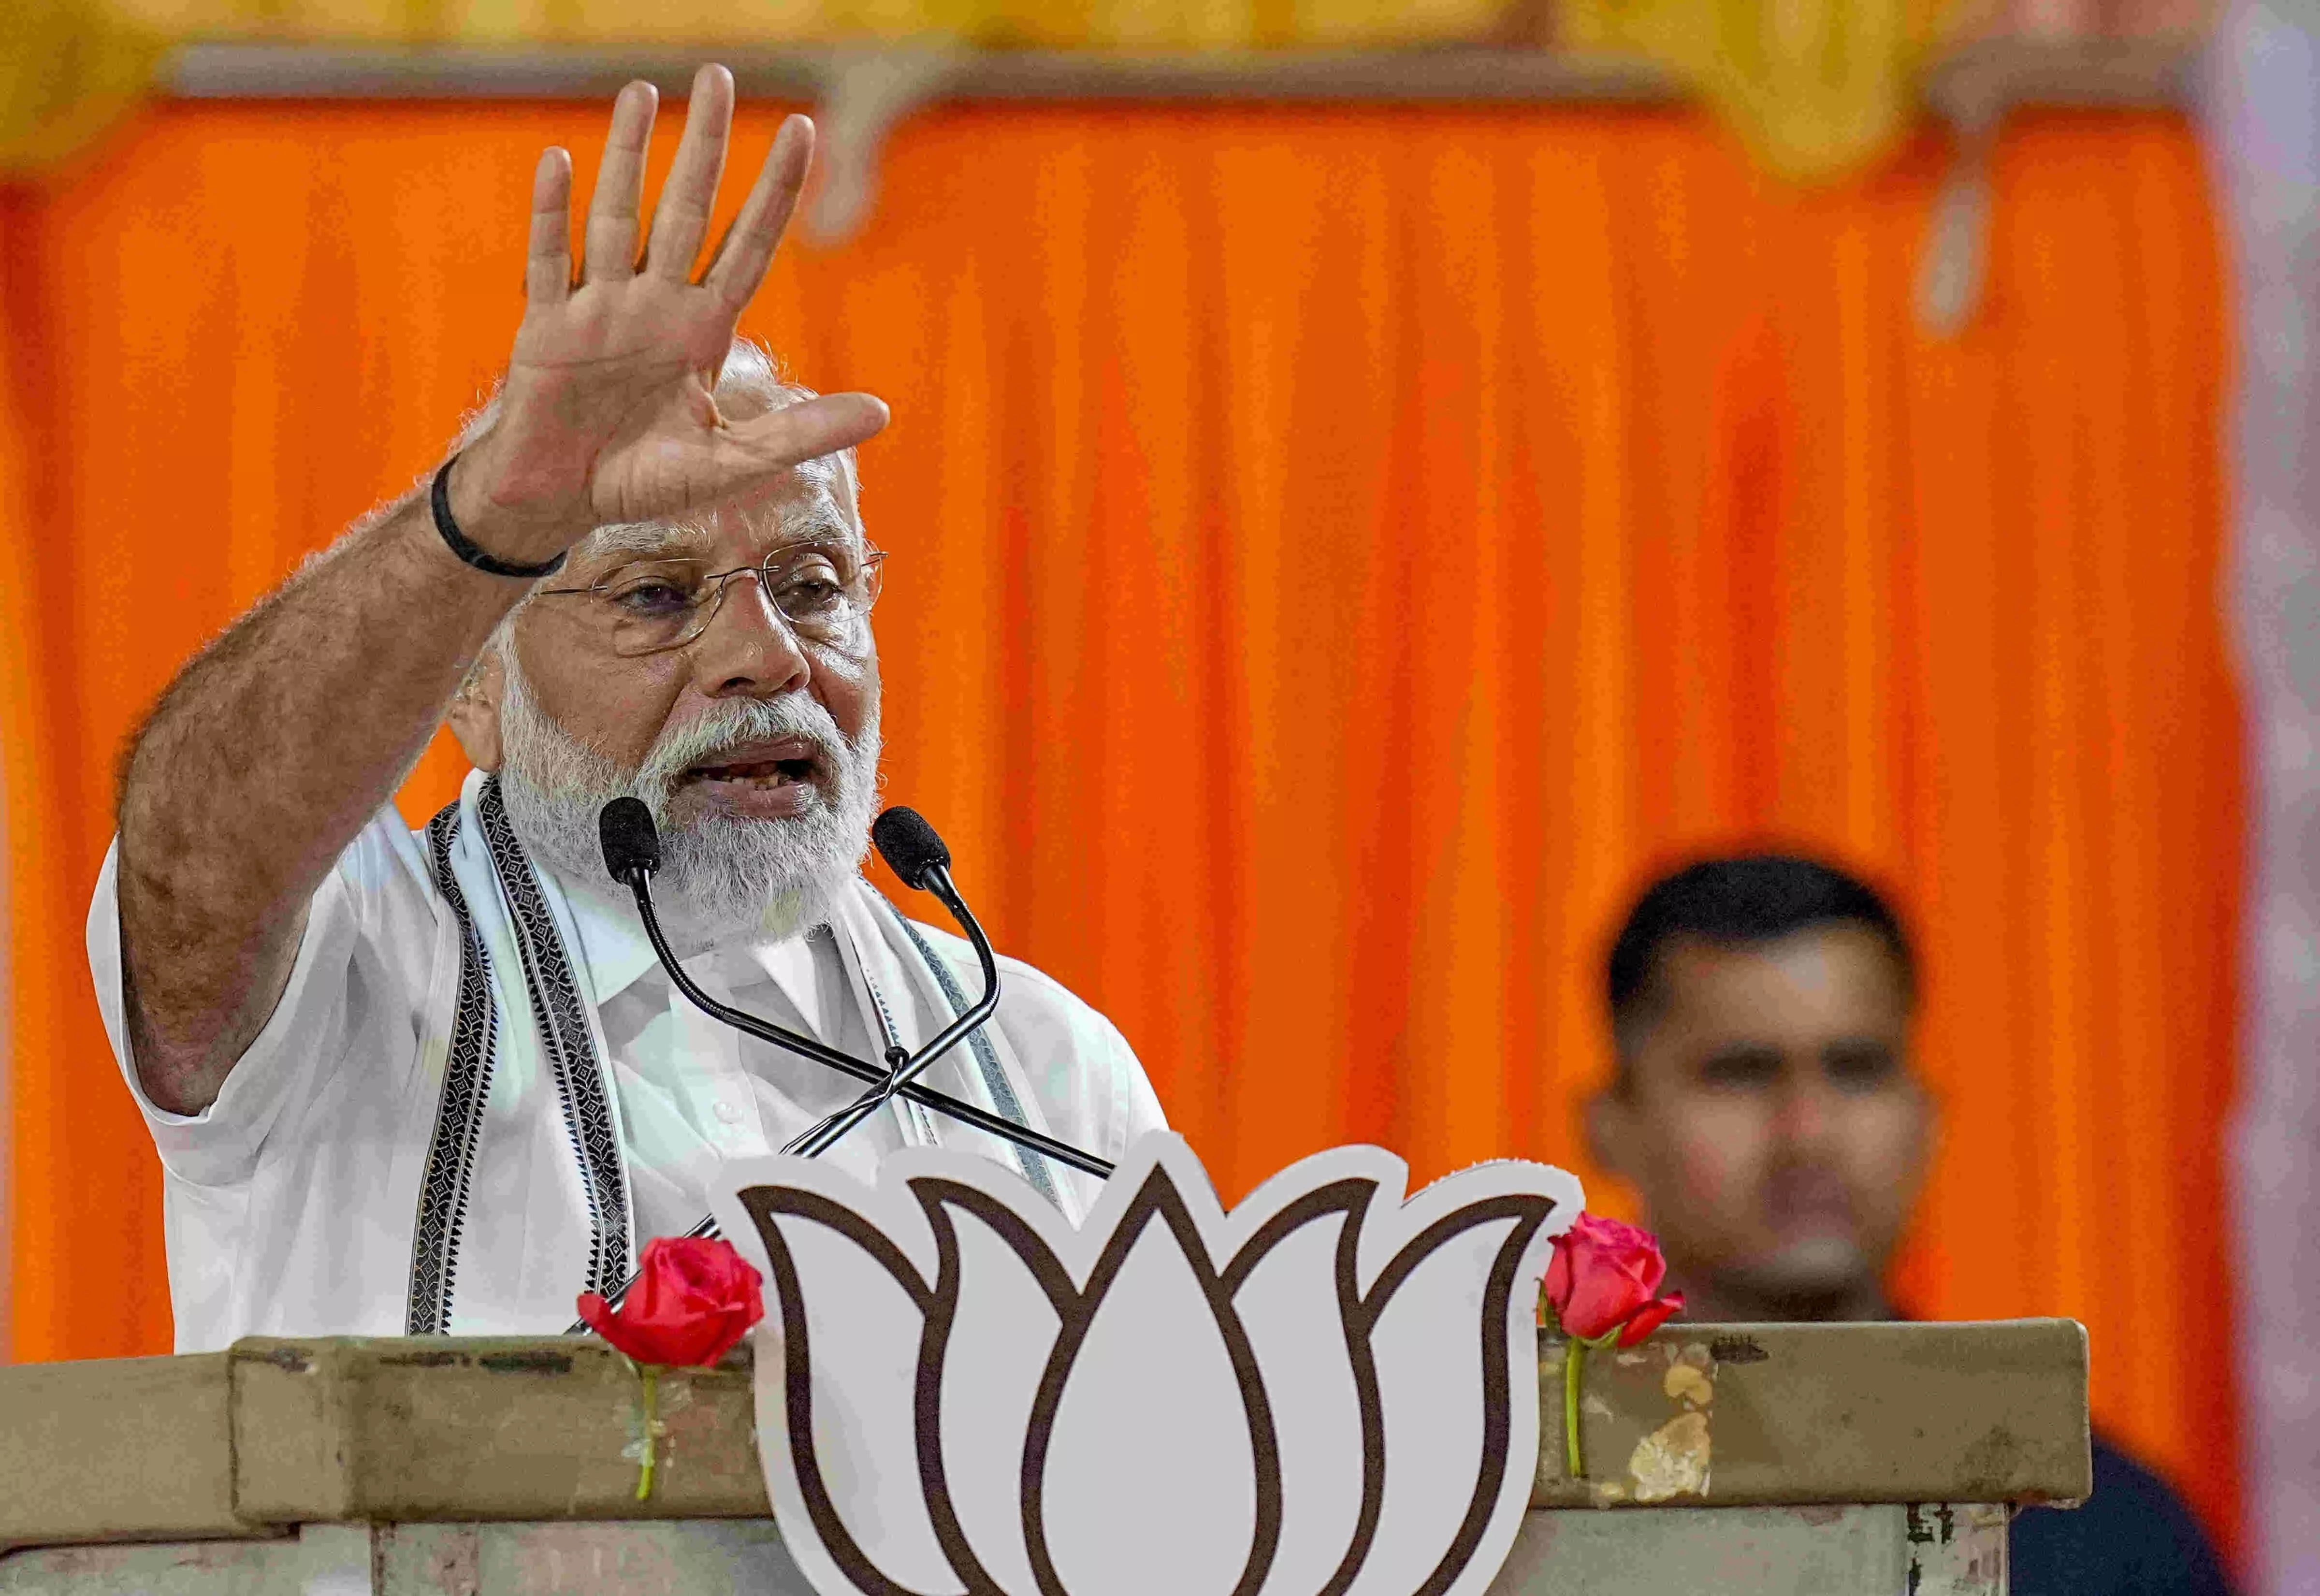 Congress brought disrepute to India during its rule: PM Modi